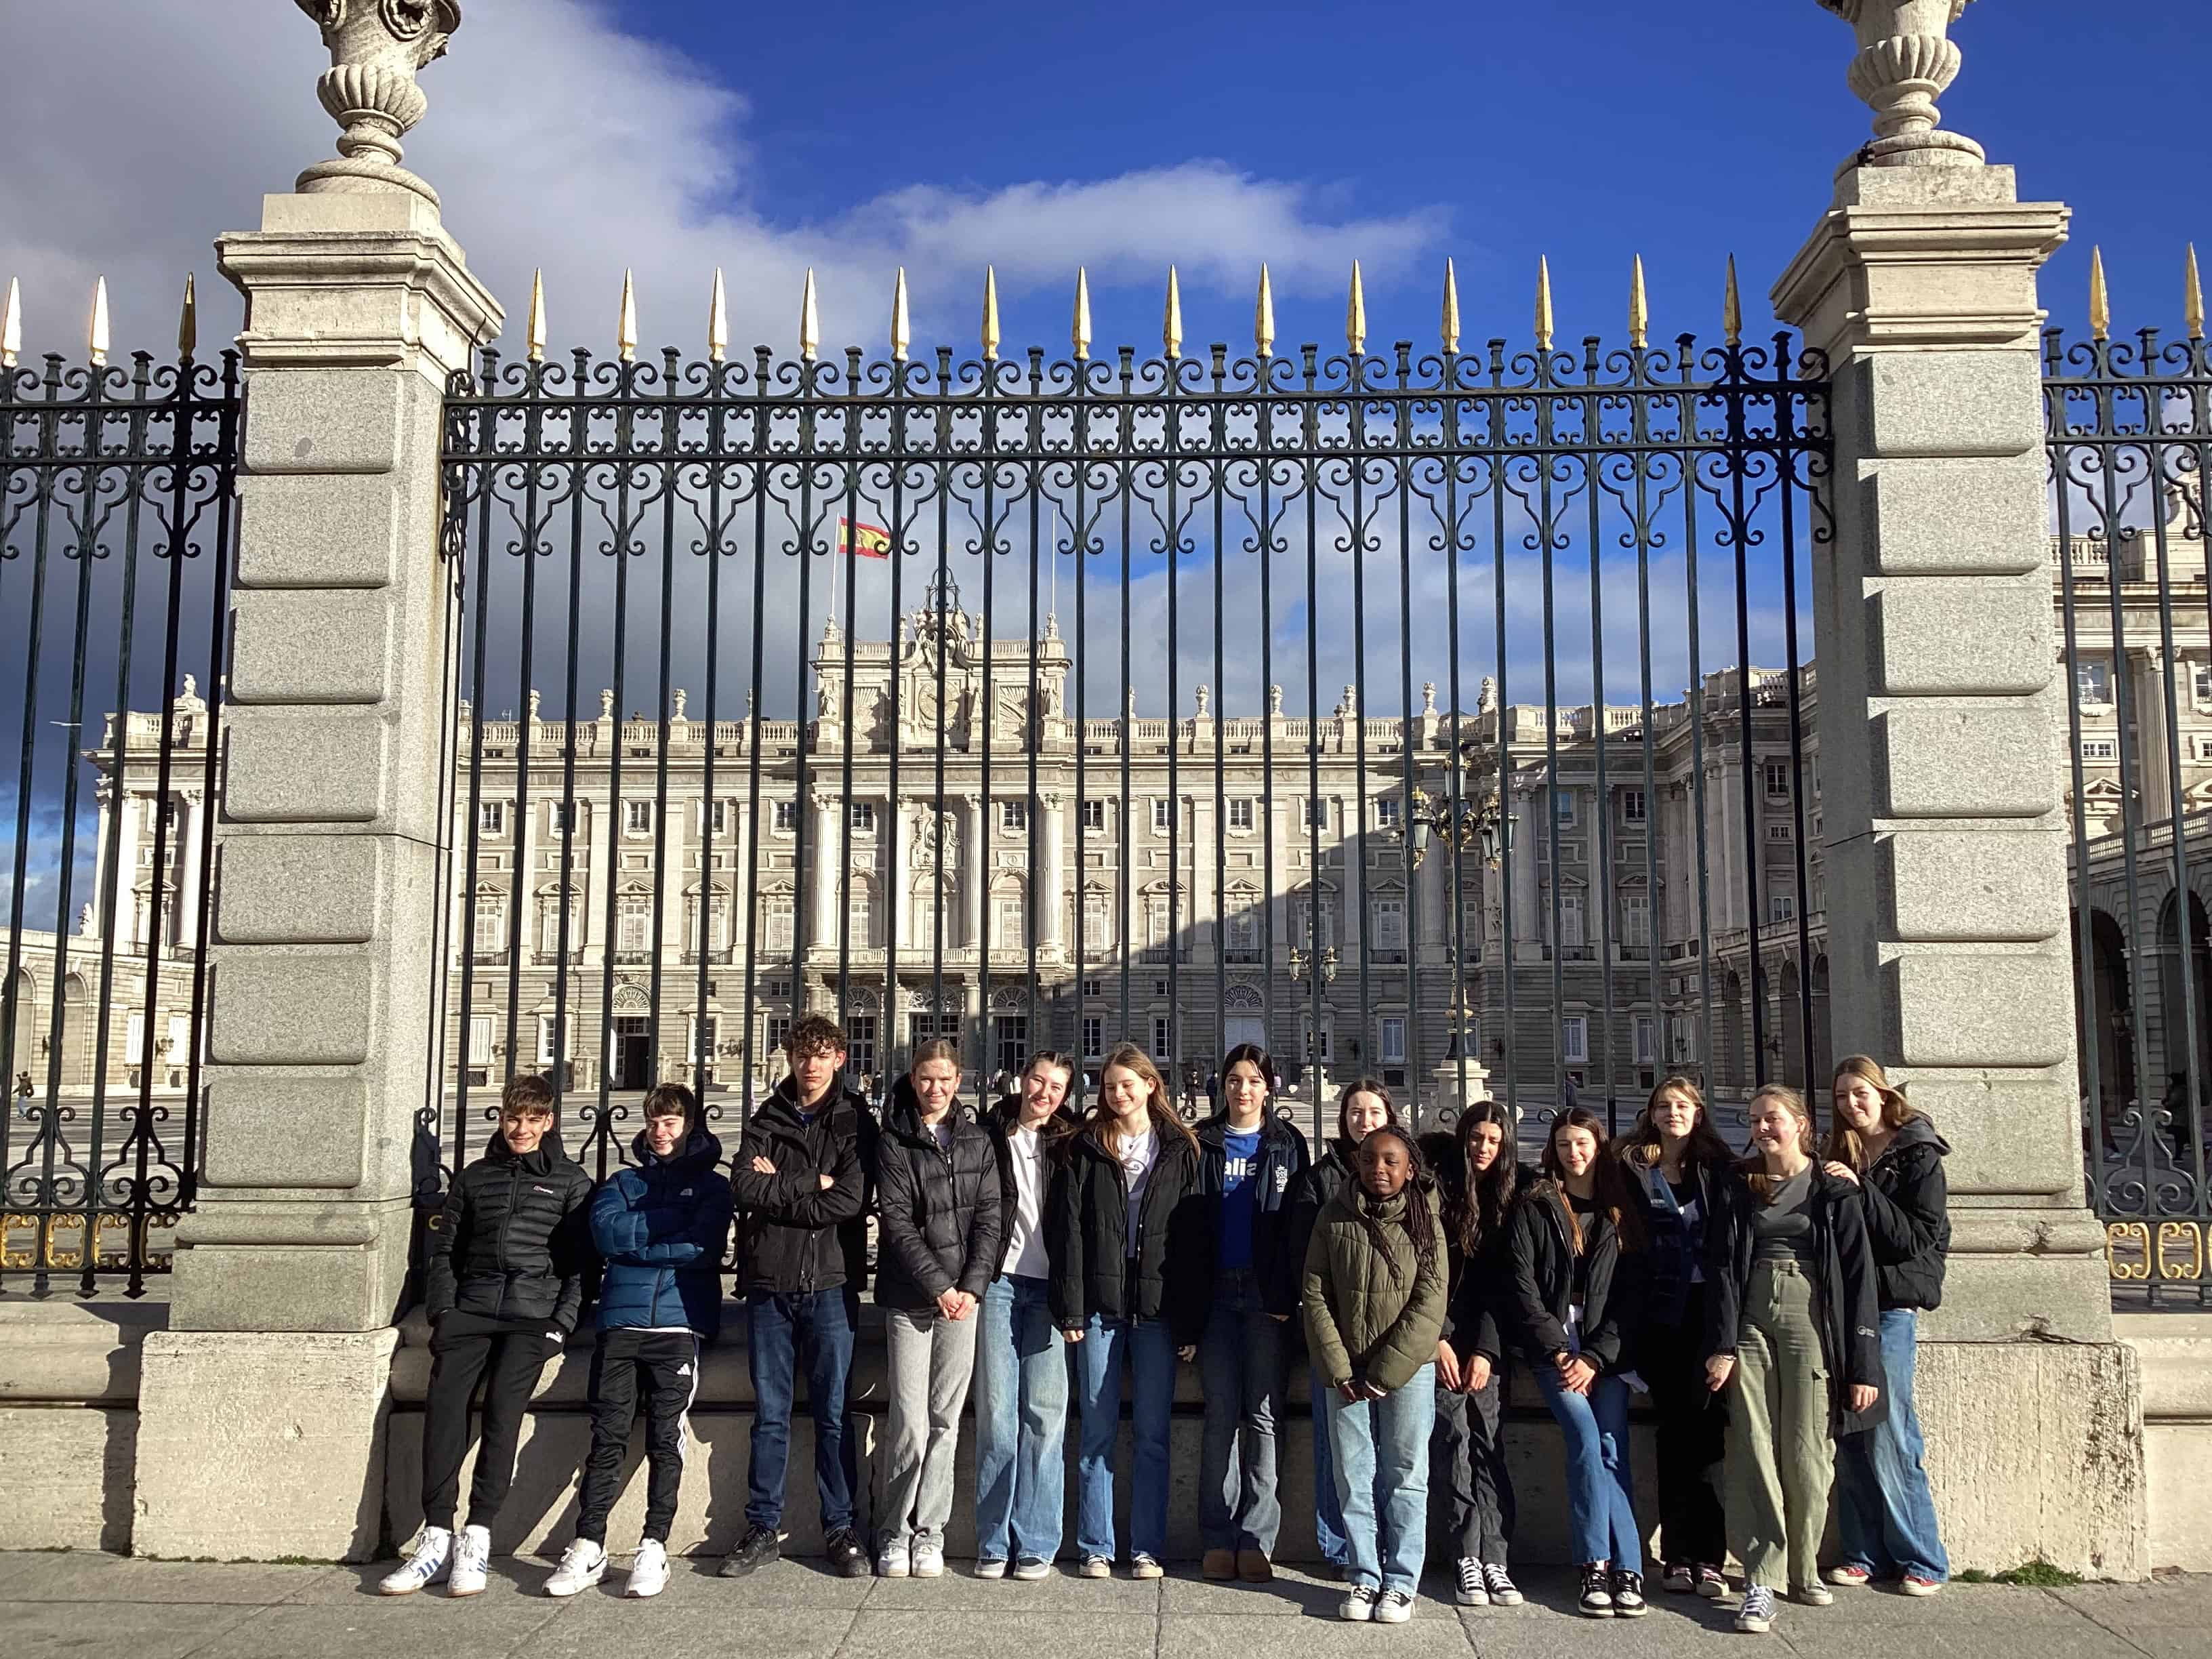 Students from Priestnall School stand in front of the gates of the Royal Palace of Madrid.